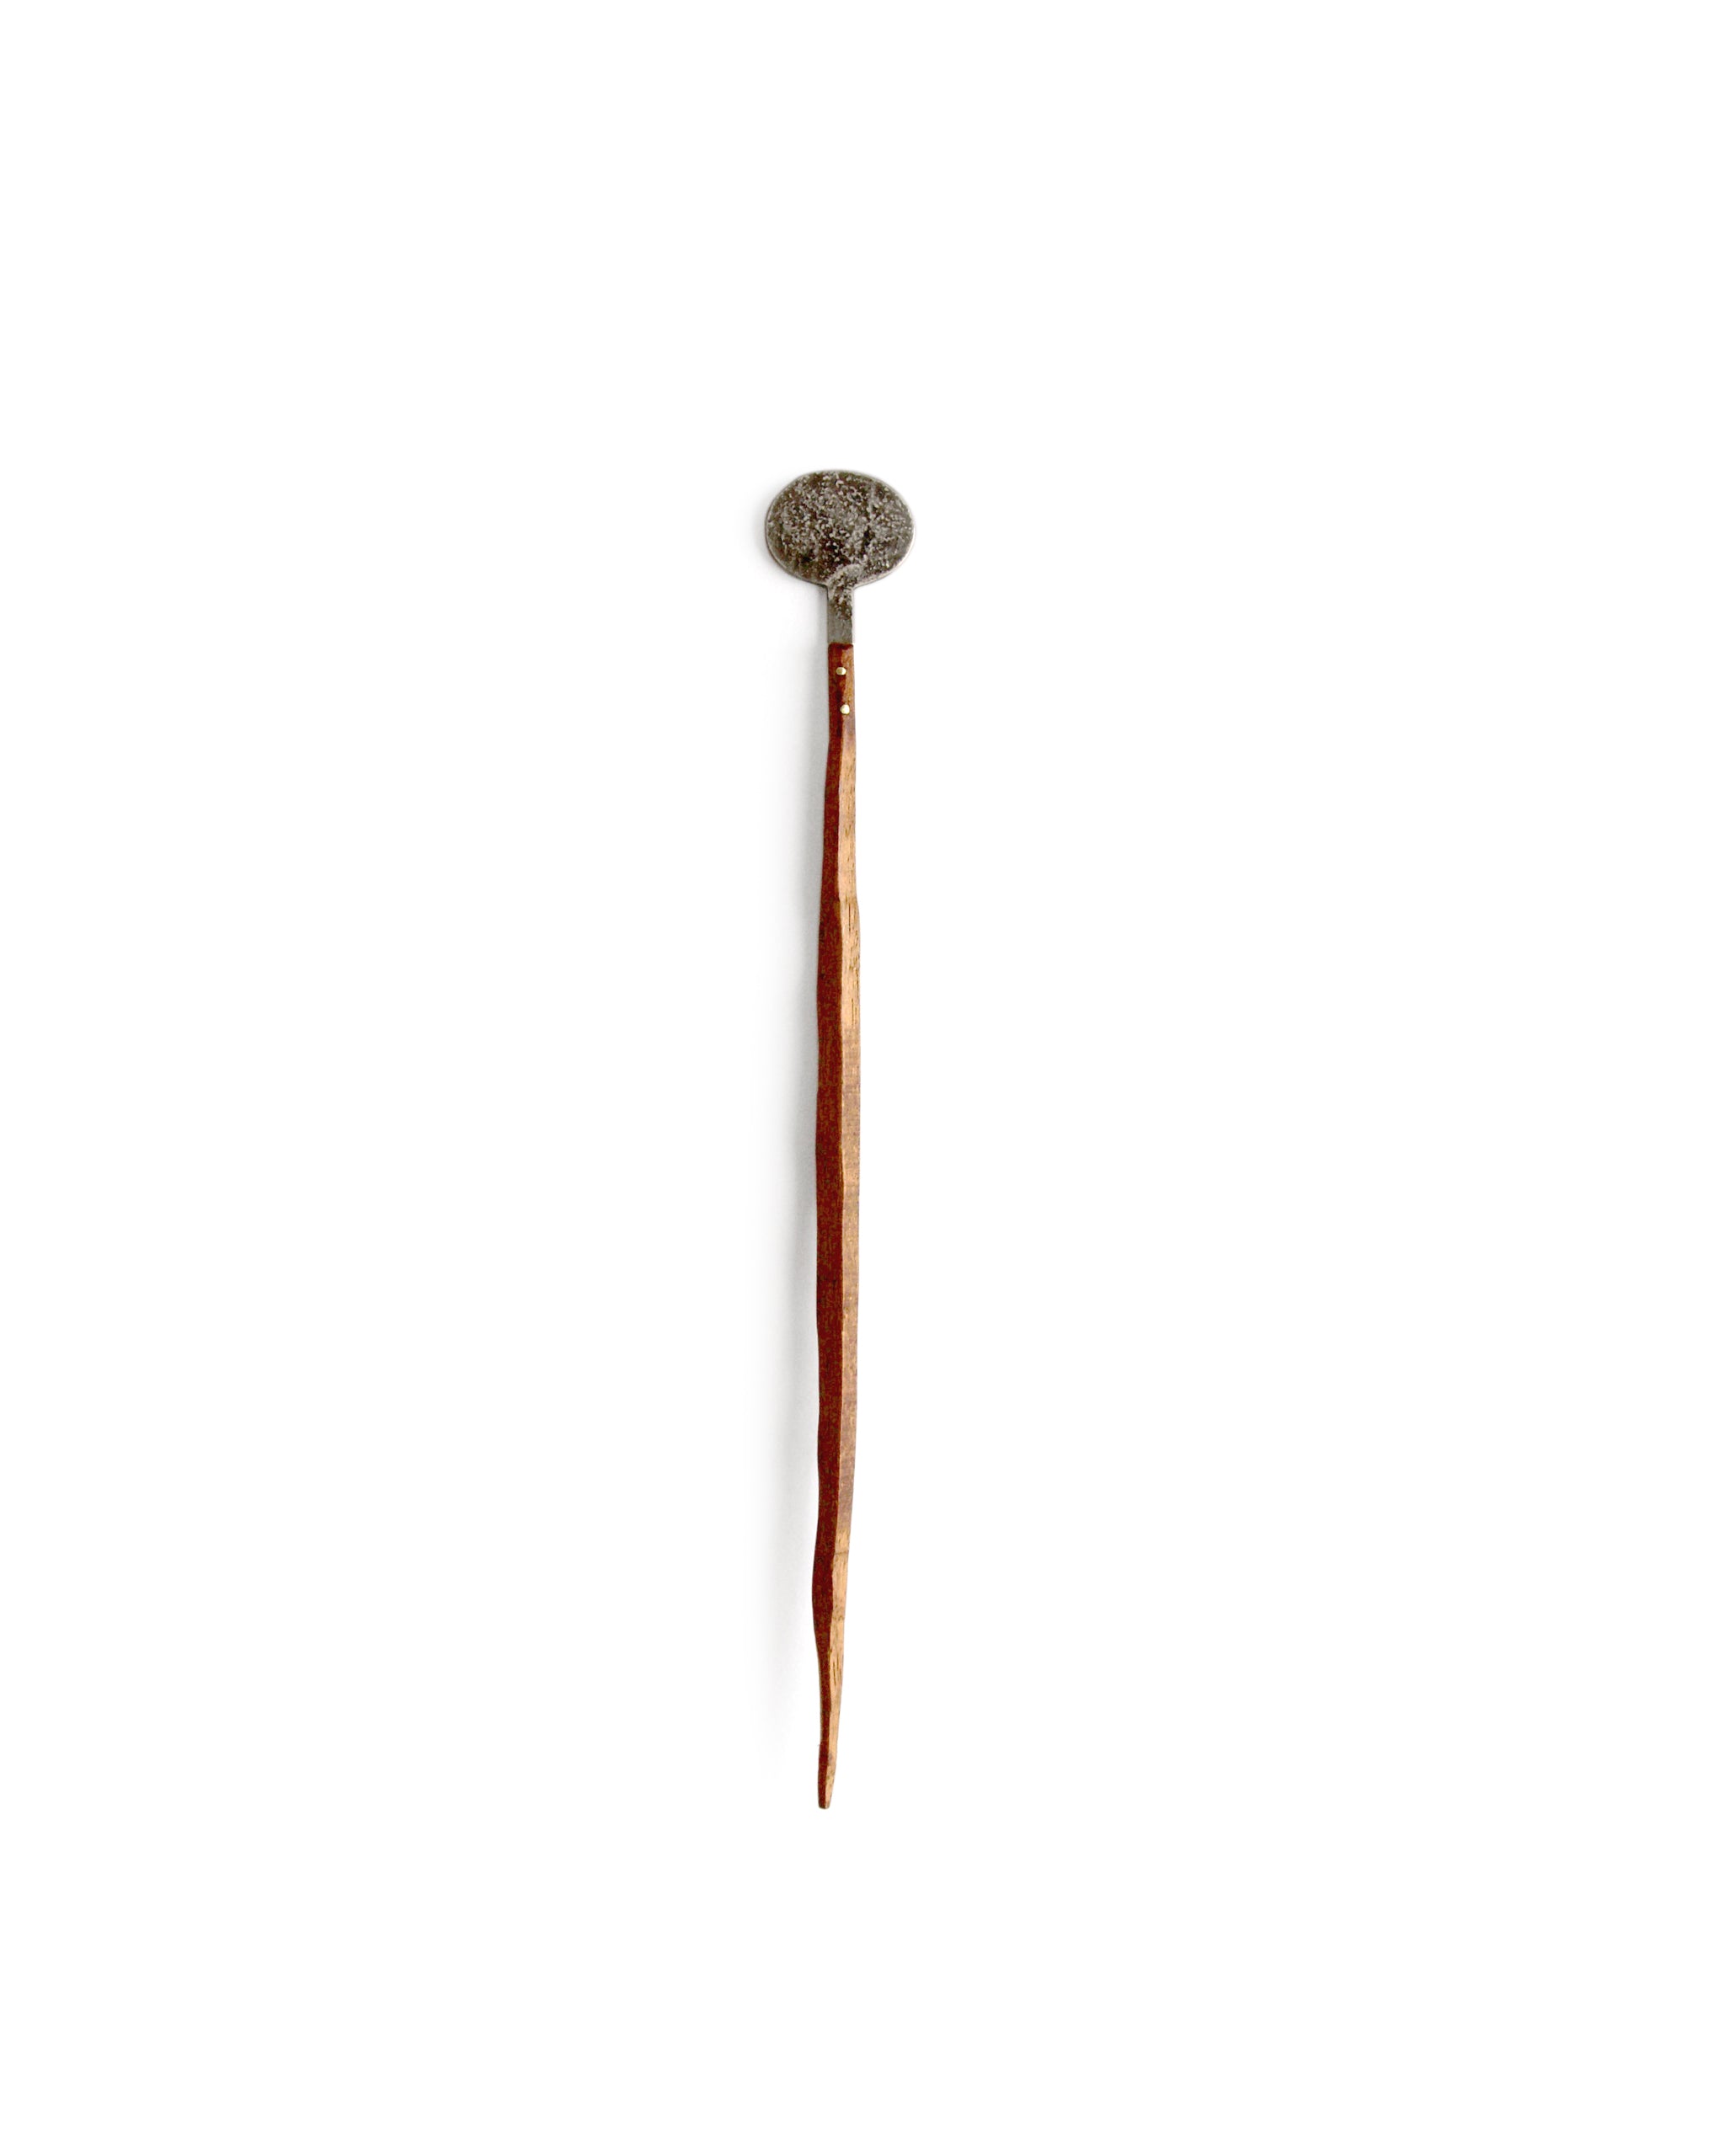 Mahogany Sprout Chashaku Tea Ladle - Paddle (OUT OF STOCK)